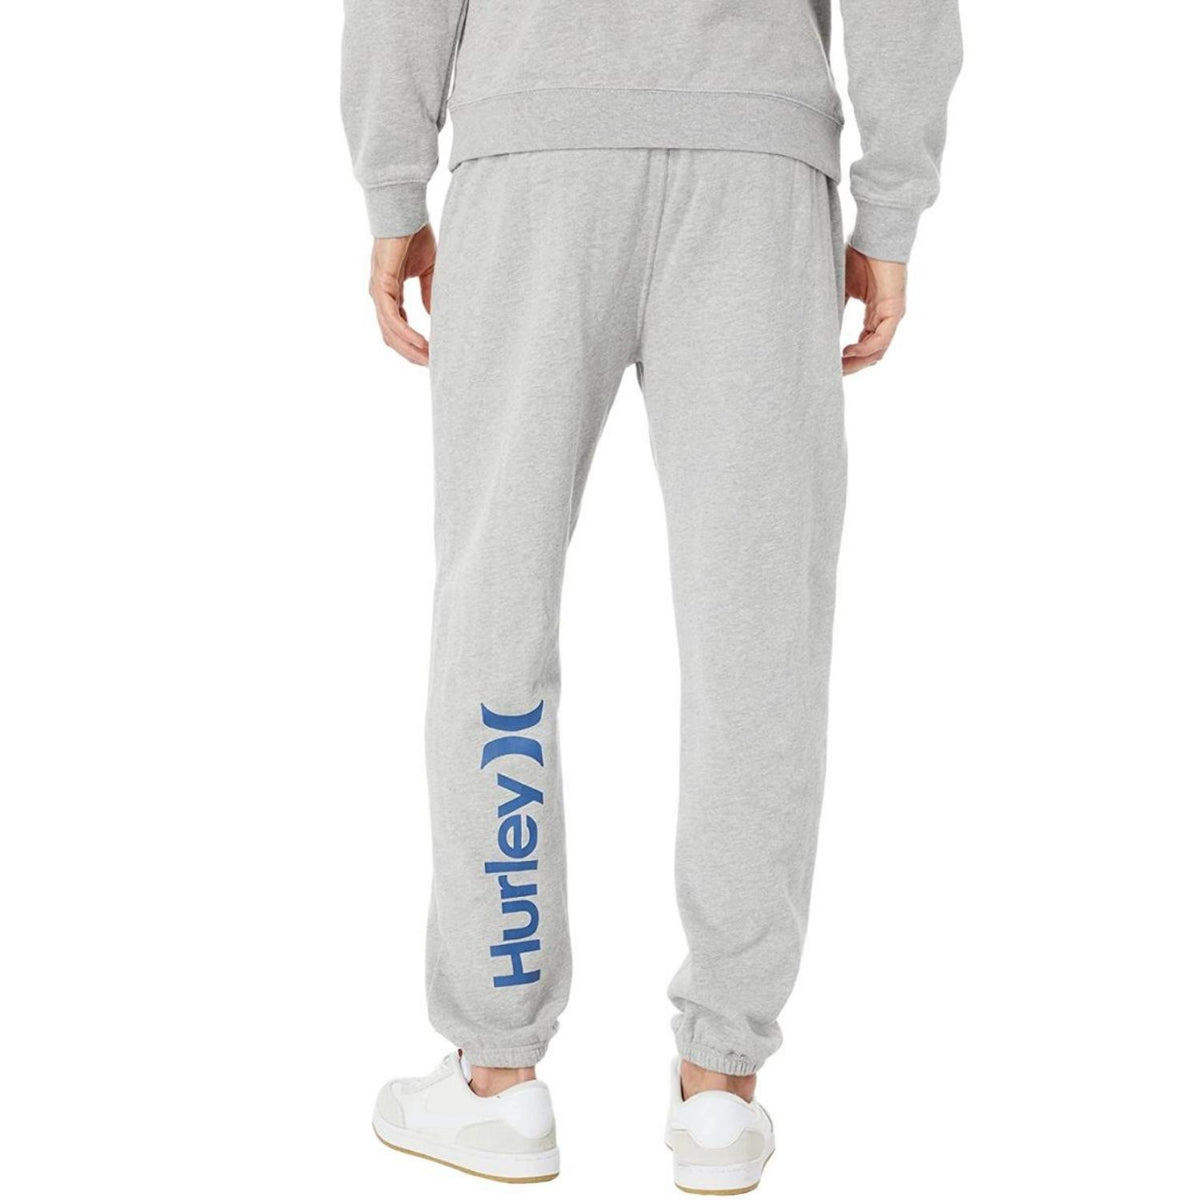 Hurley One And Only Solid Summer Fleece Joggers - Dark Grey Heather - Mens Joggers by Hurley